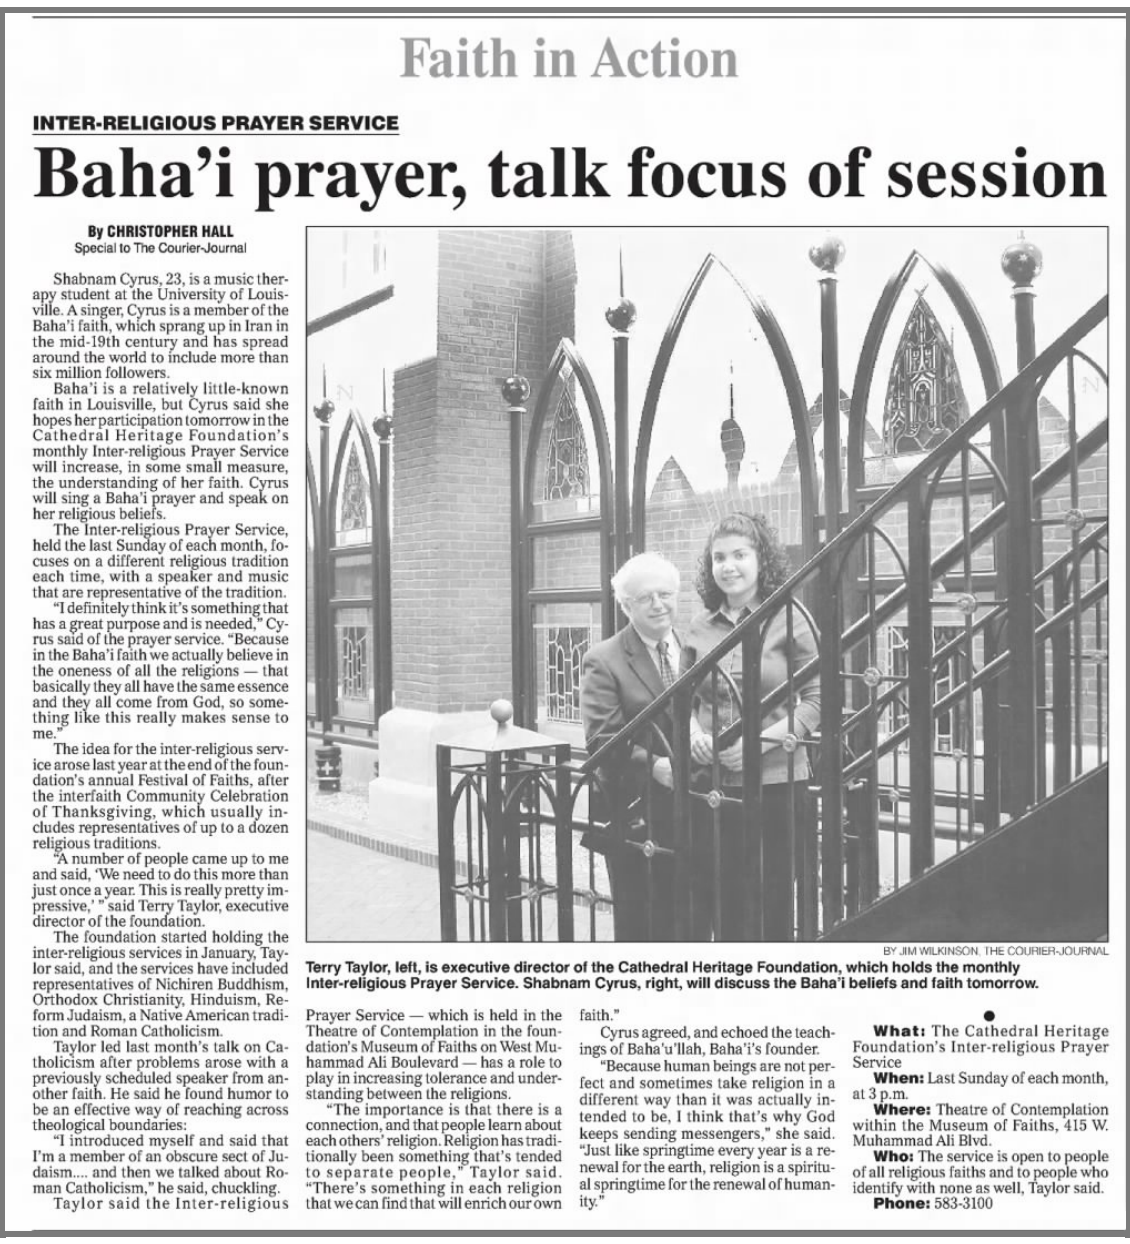 Hall, Christopher. “Baha'i Prayer, Talk Focus of Session.” The Courier-Journal, 23 Sept. 2003, p. B2.